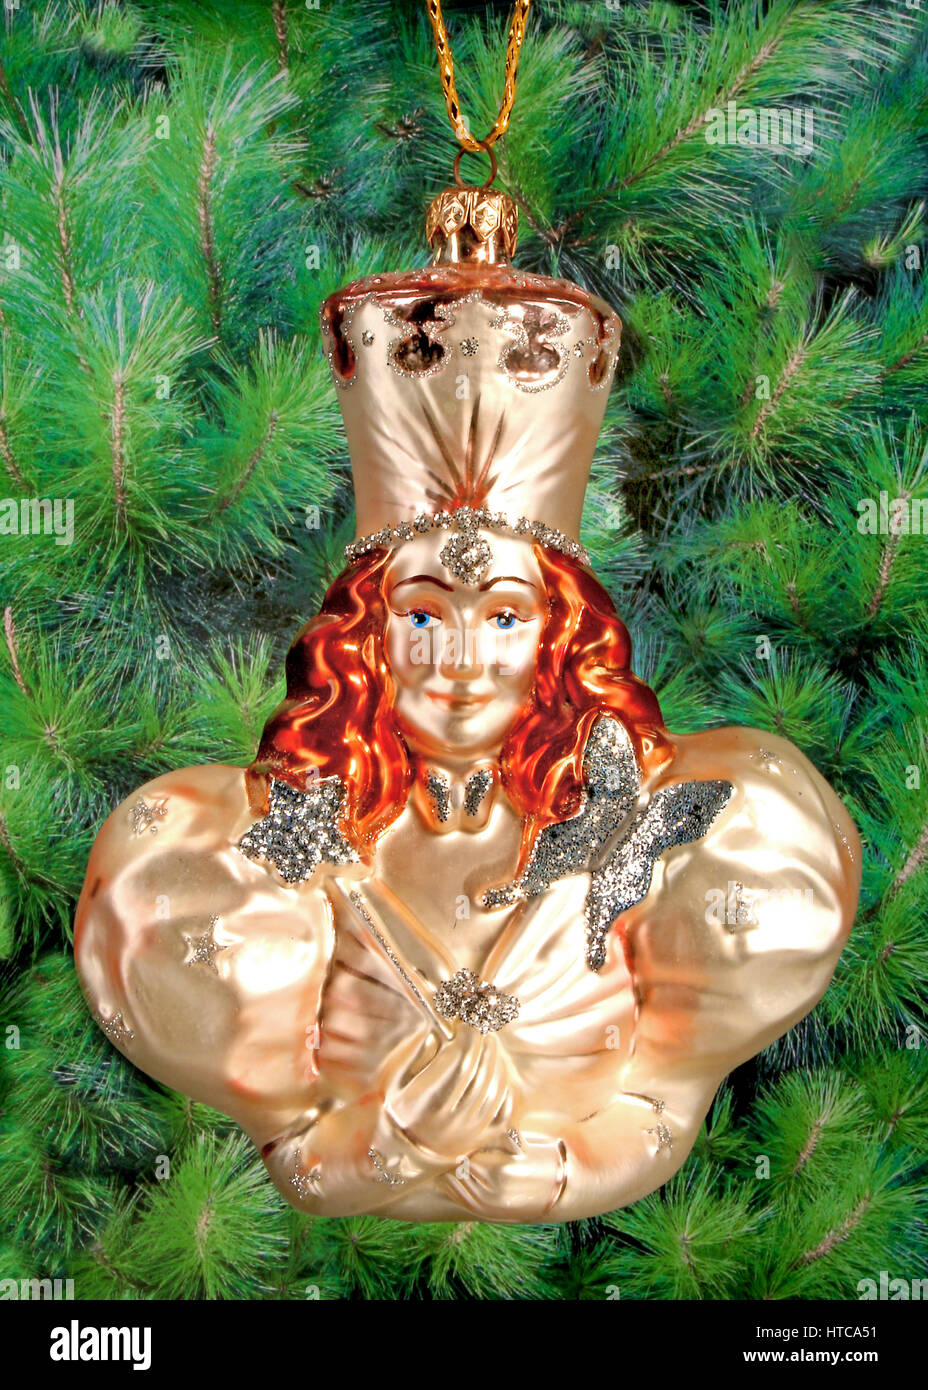 Christmas bauble in the shape of the Good Witch from the Wizard of Oz Stock Photo